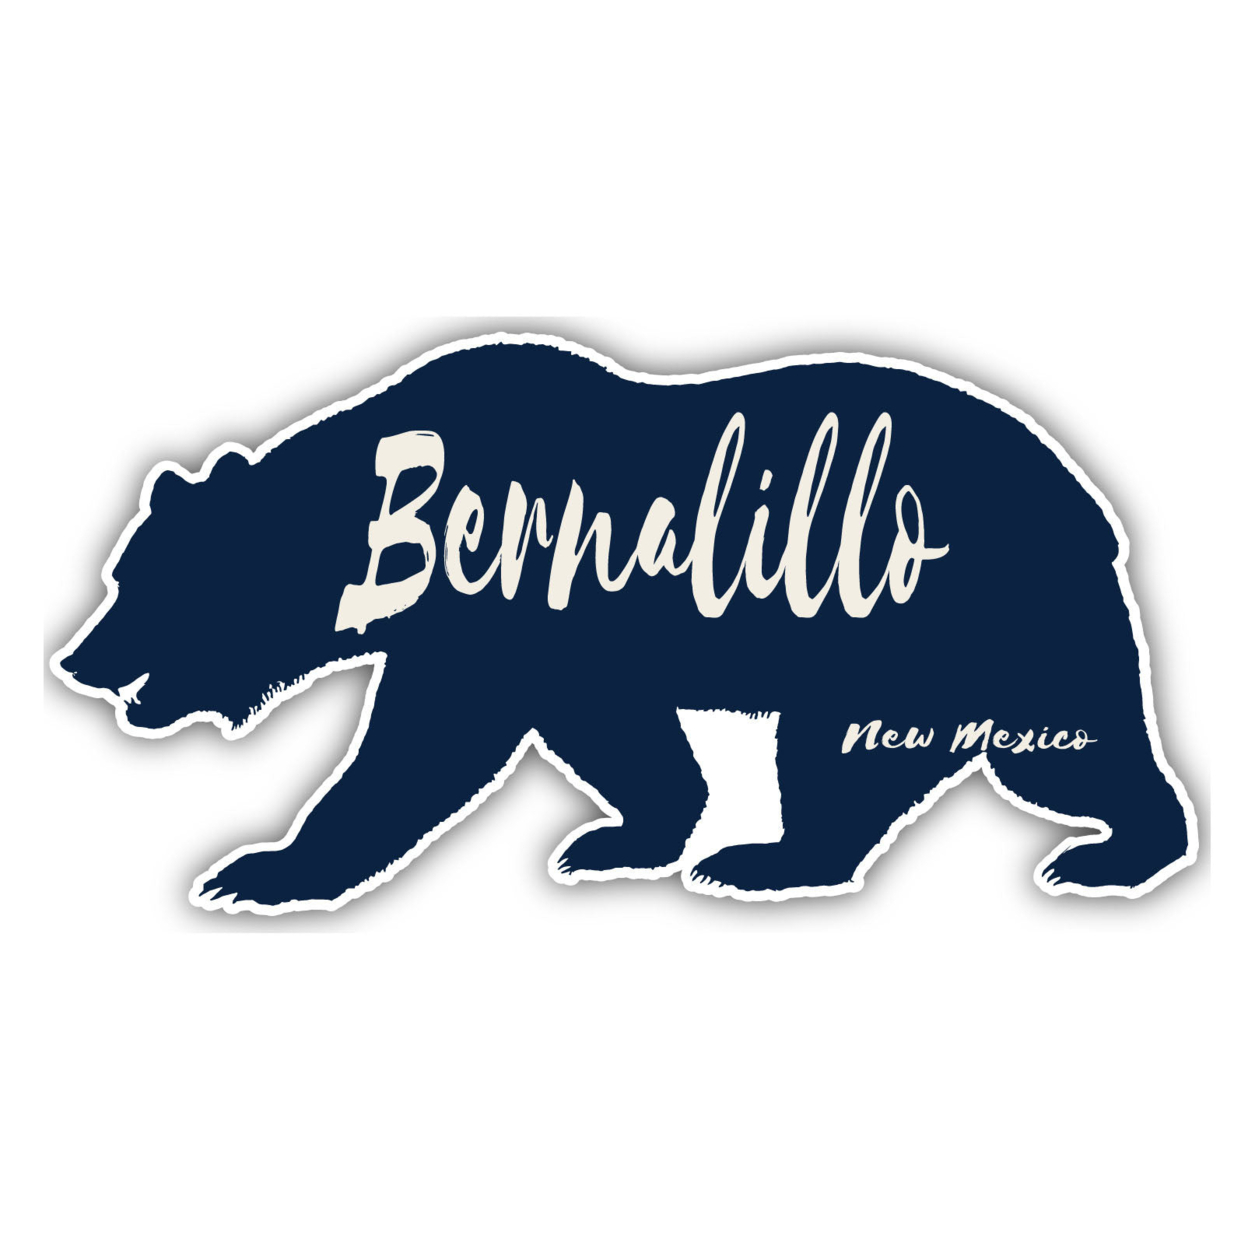 Bernalillo New Mexico Souvenir Decorative Stickers (Choose Theme And Size) - 4-Pack, 8-Inch, Tent